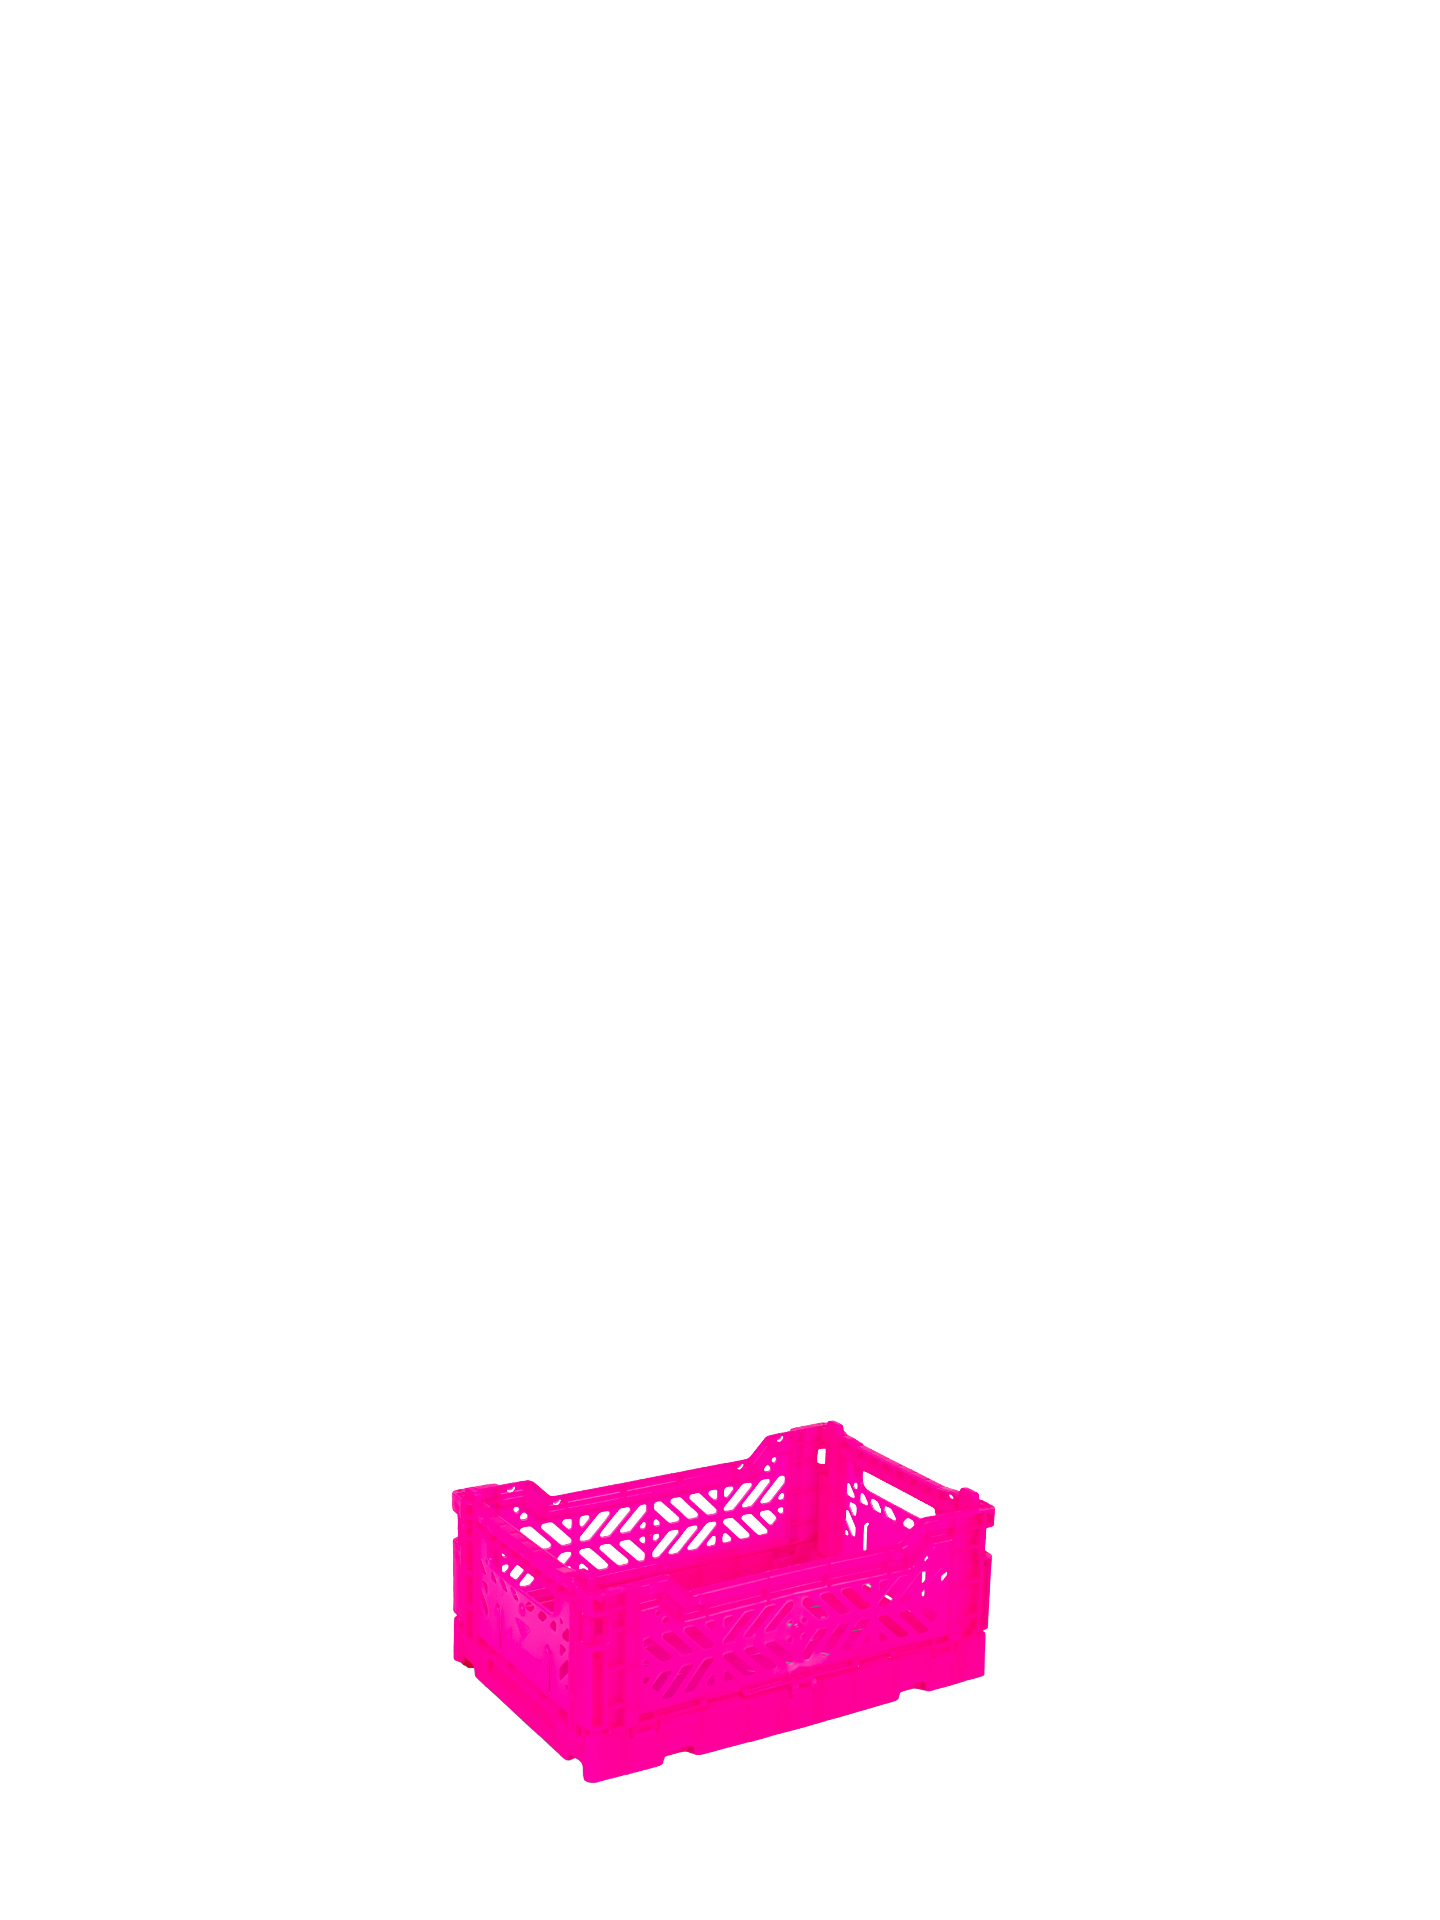 Mini Aykasa crate in neon pink stacks and folds